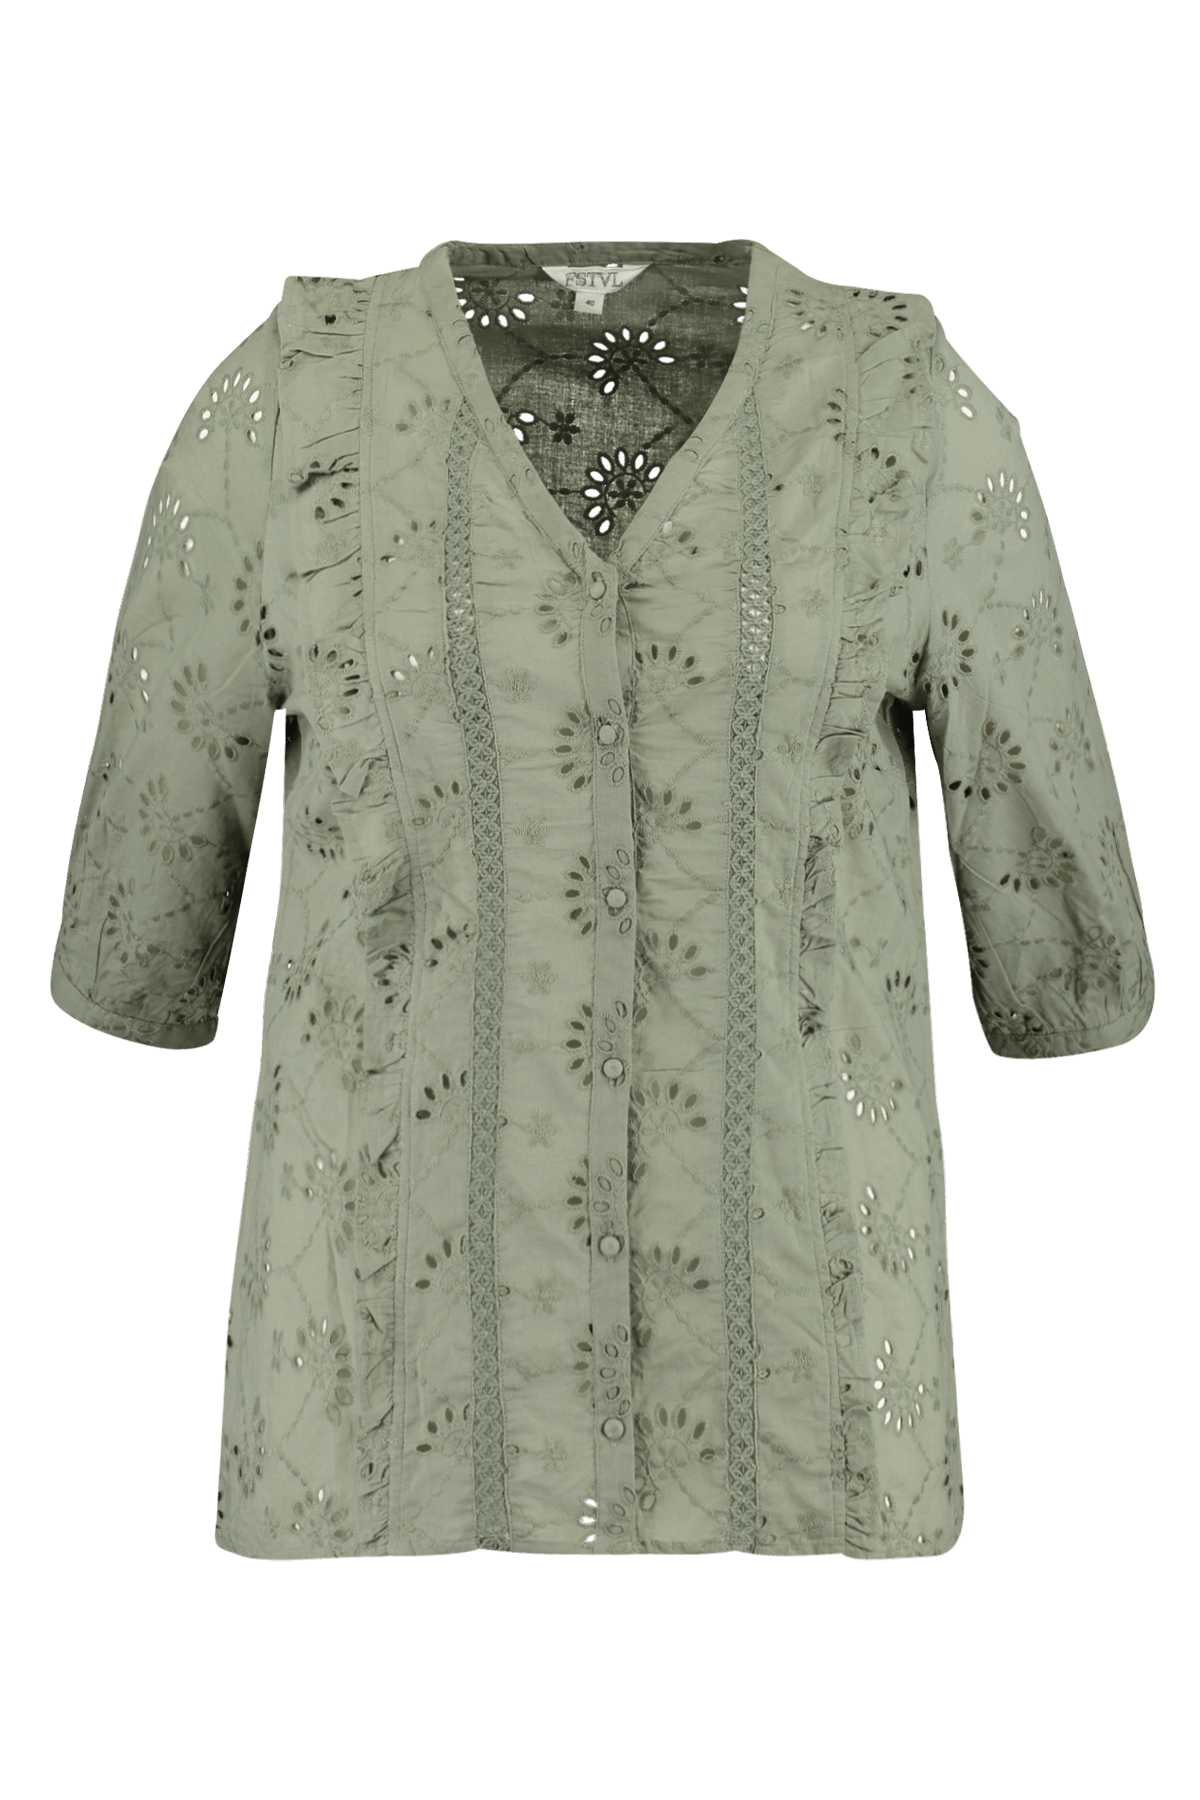 Broderie angliase blouse image 2